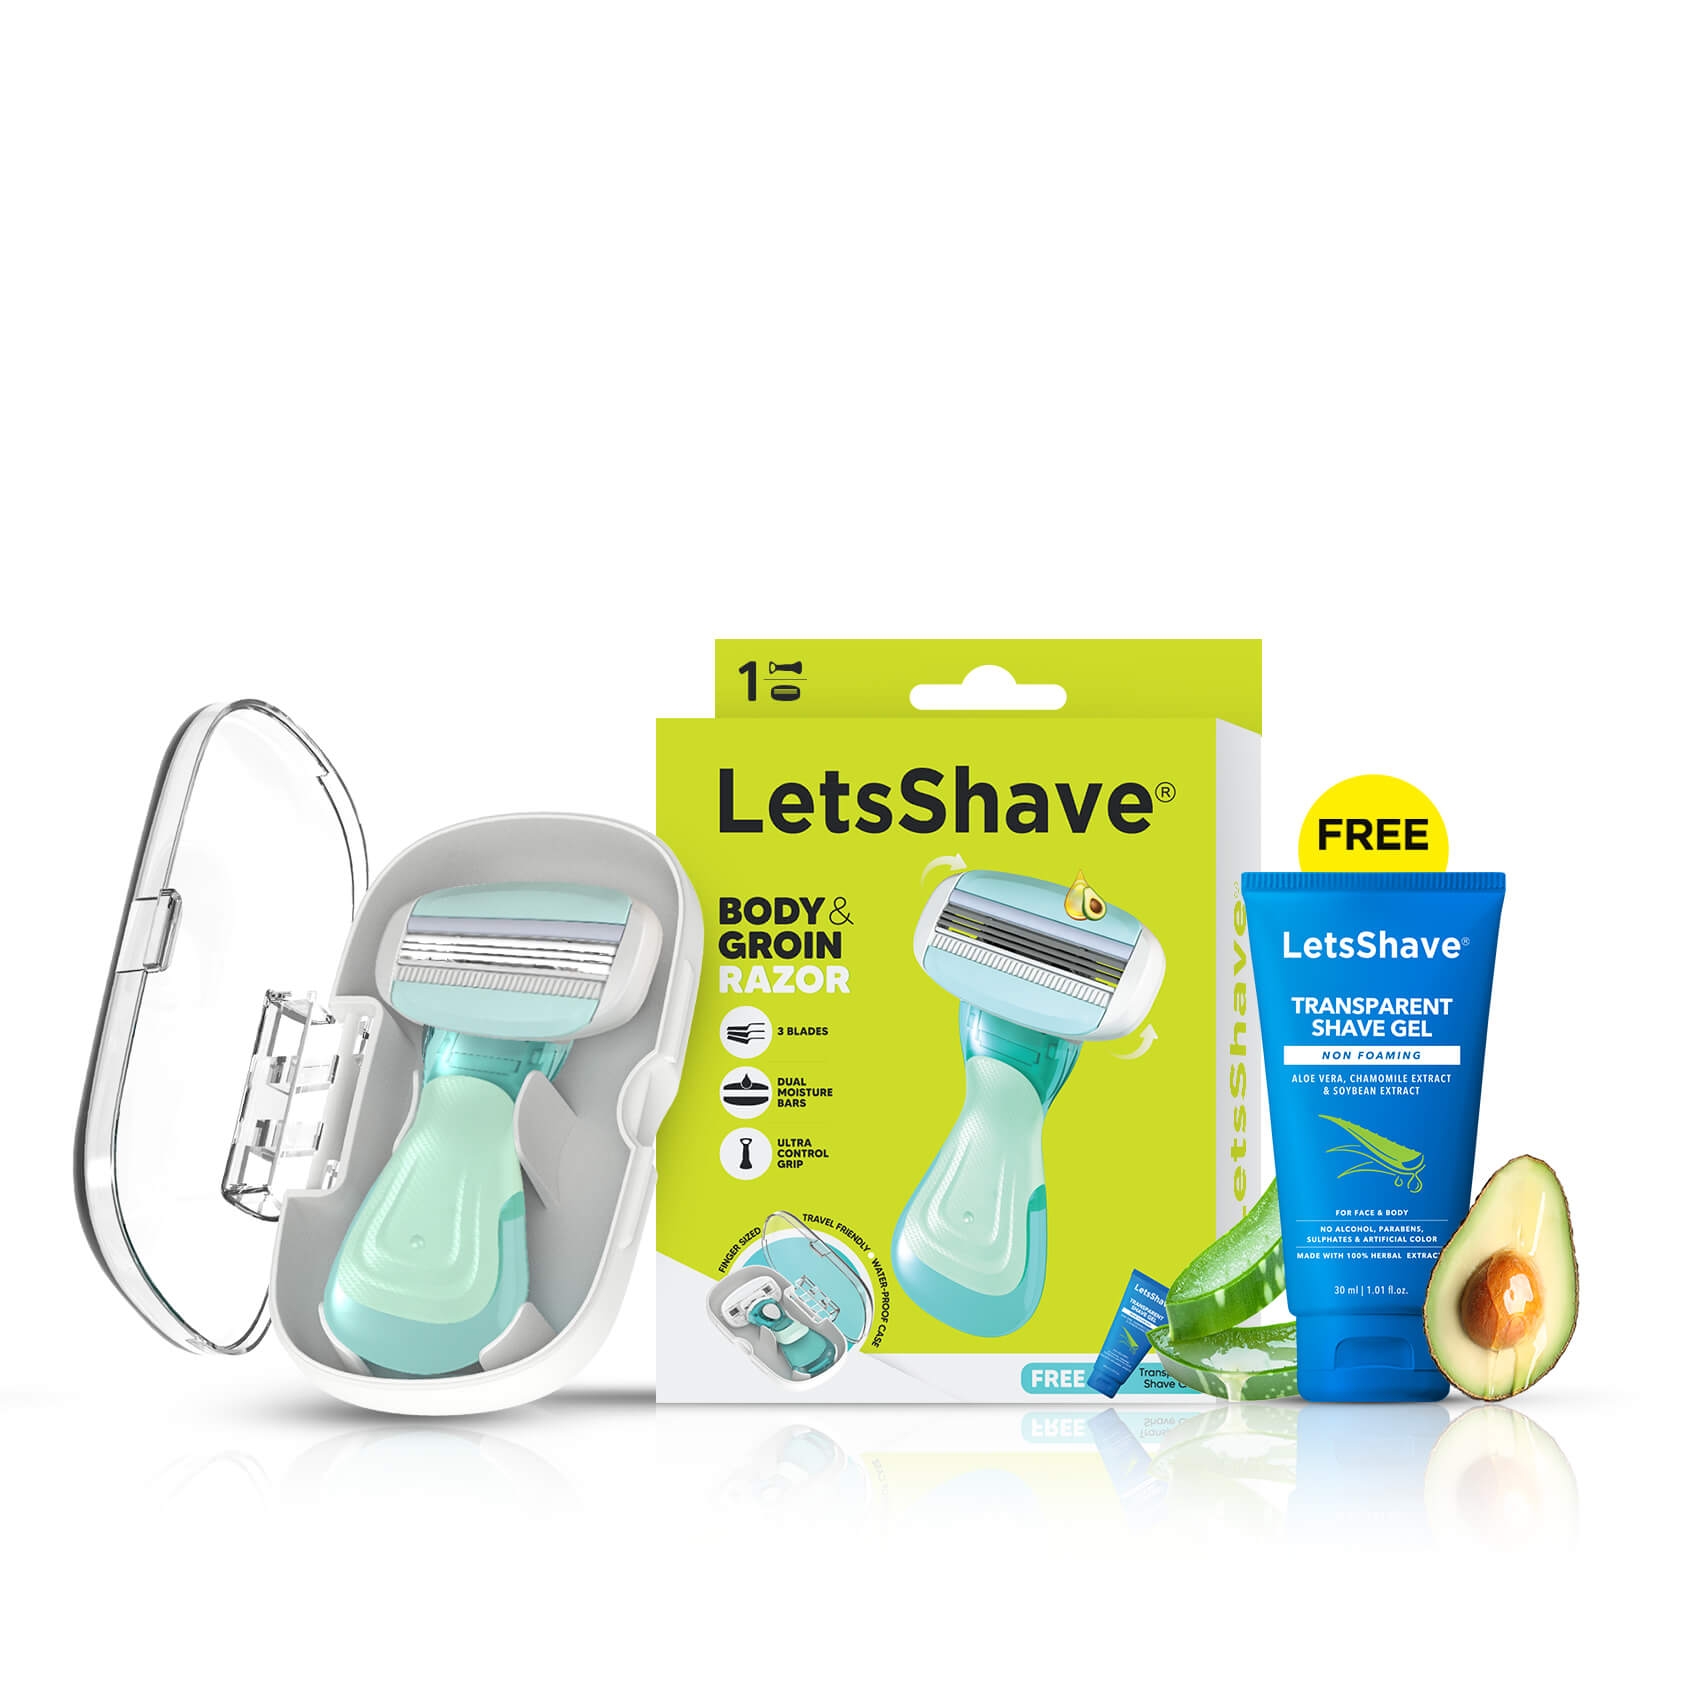 LetsShave | LetsShave Body and Groin Razor for Men with free Transparent Shave Gel | 3 Blade painless Groin and Body Hair Remover with Dual Moisture Bars | Compact Razor with Clamshell Travel Case 0